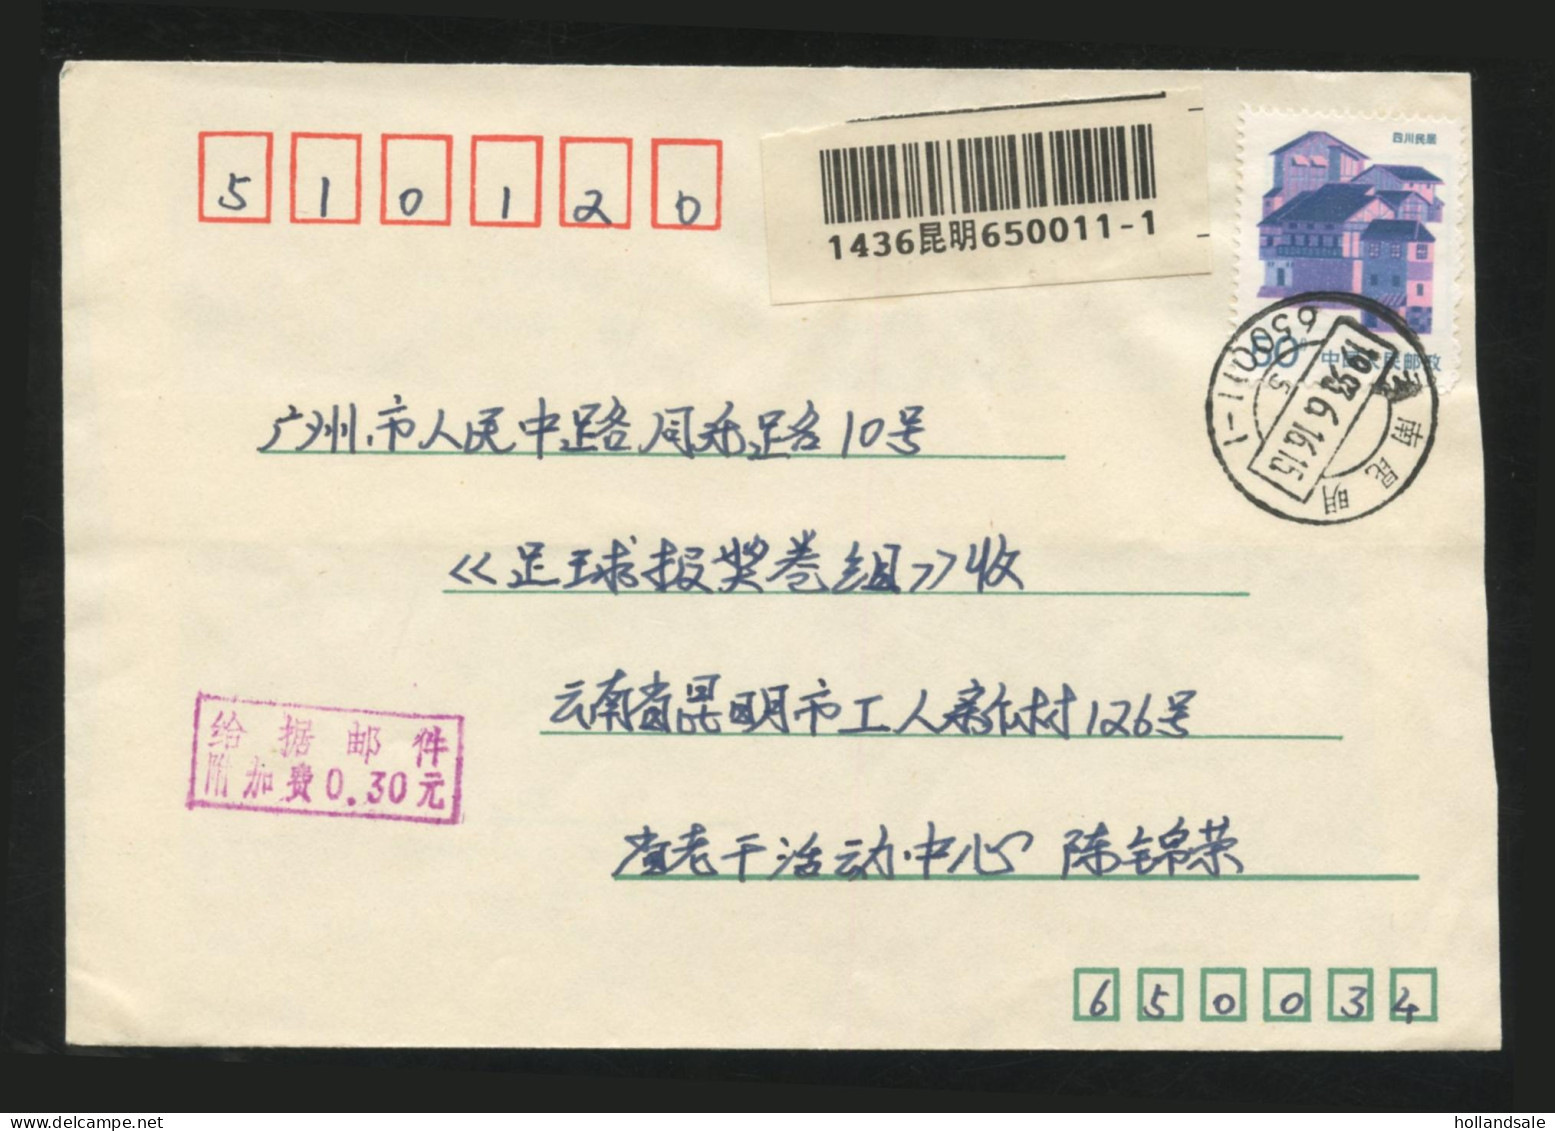 CHINA PRC / ADDED CHARGE - Cover Sent From Kunming To Guangzhou. Violet 30f AC Chop. - Portomarken